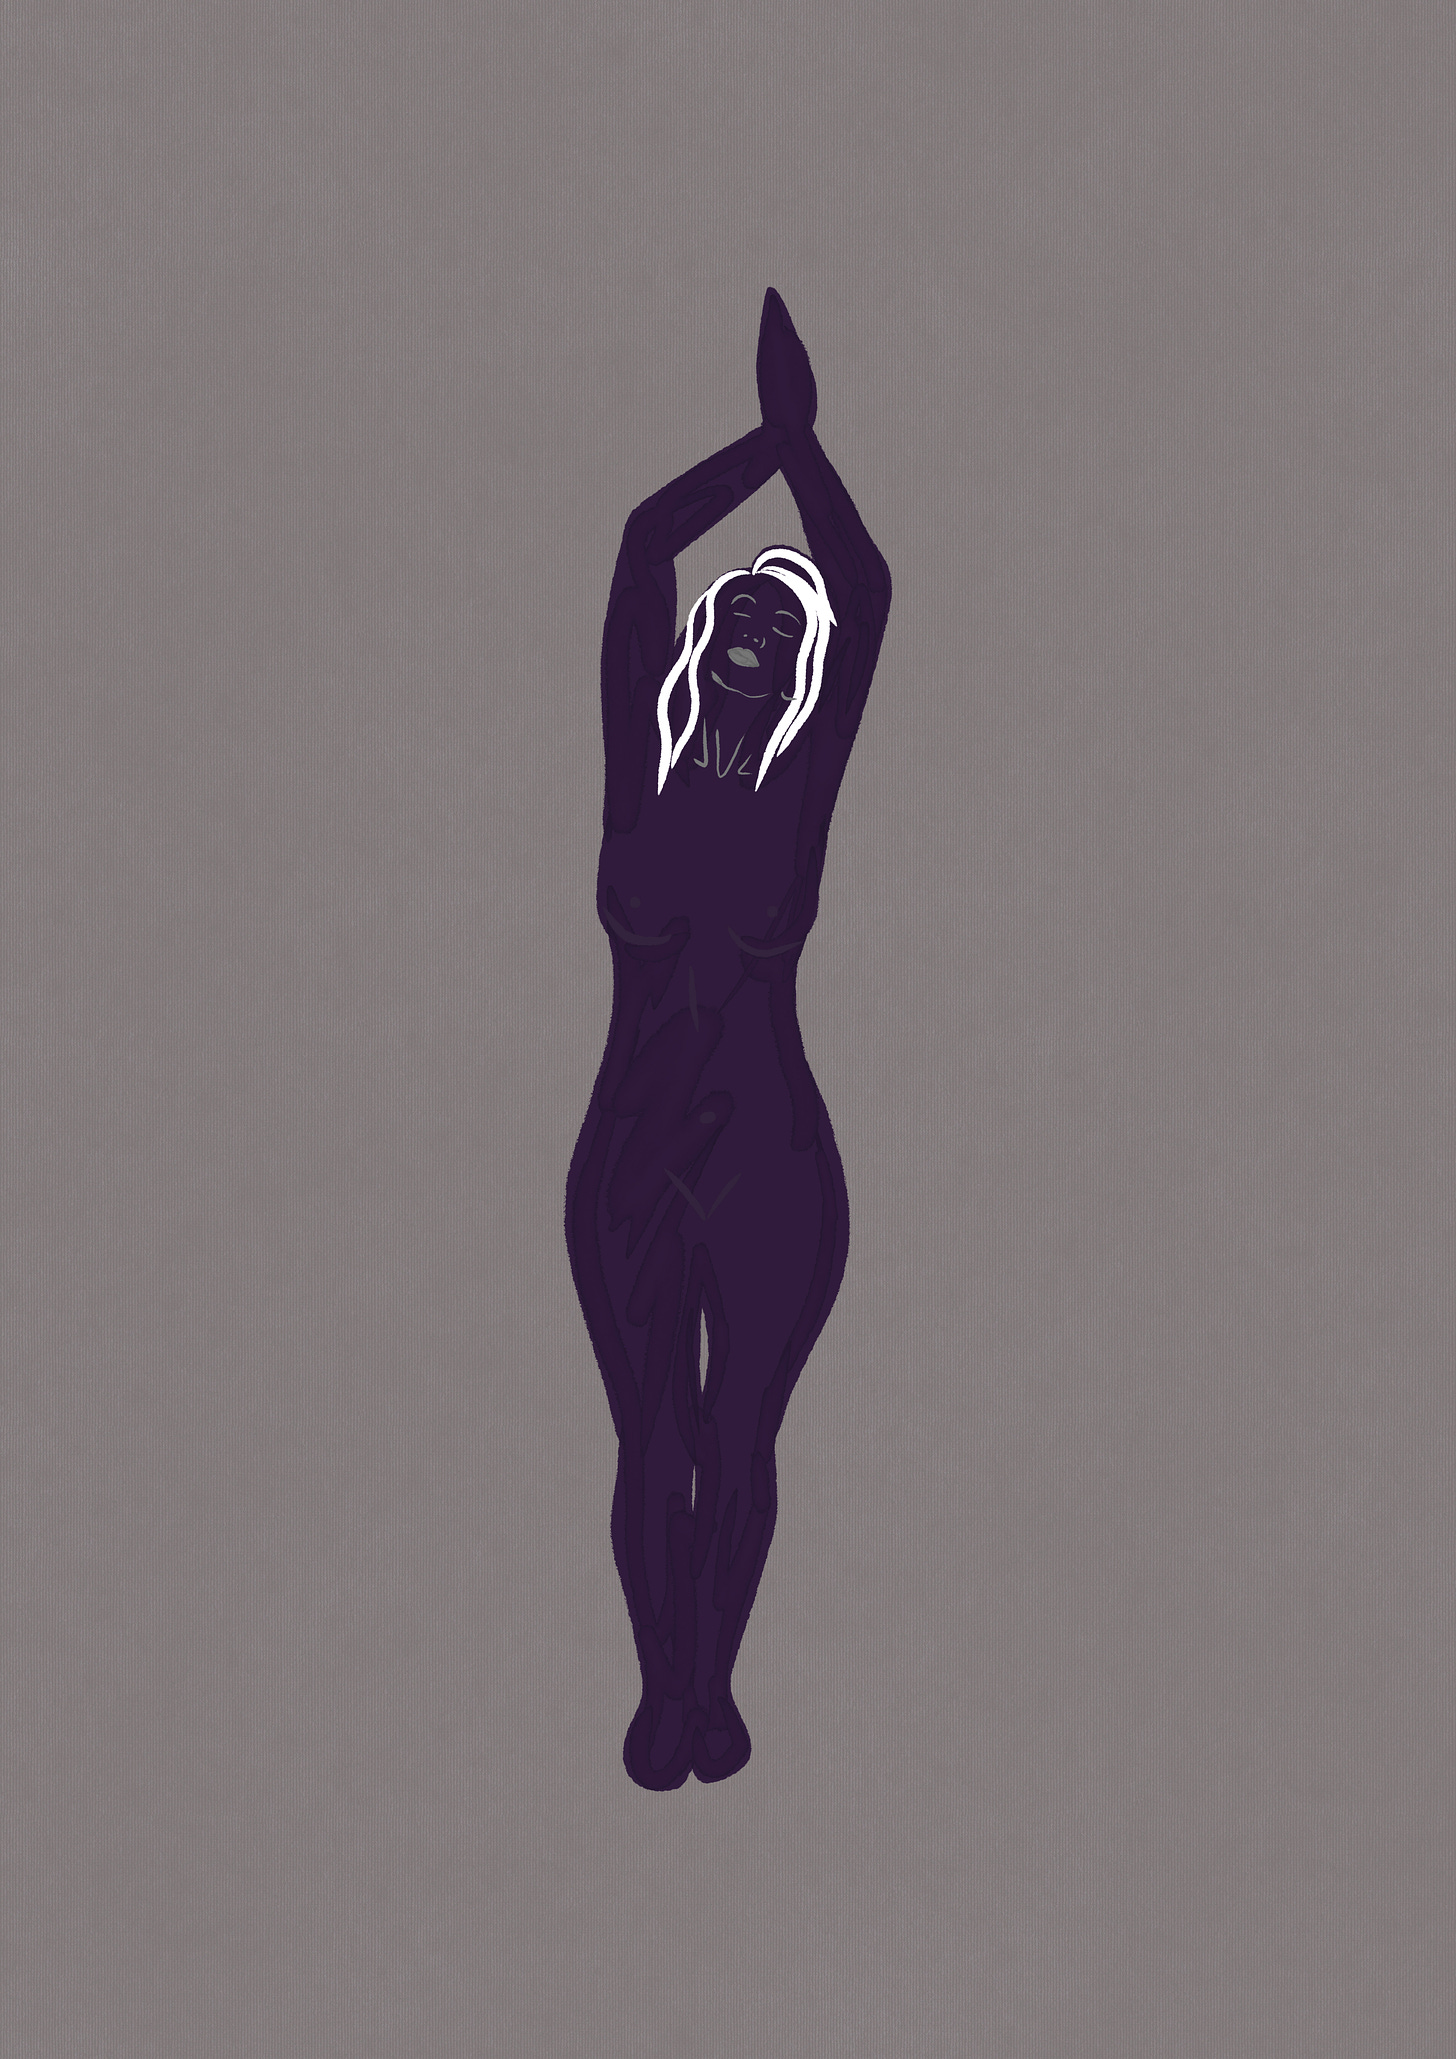 Illustration of a woman in dark purple on a grey background, with her arms above her head and her face conveys calm, peace, relaxation and acceptance, with her eyes closes. Artwork by Tamzin Merivale Art